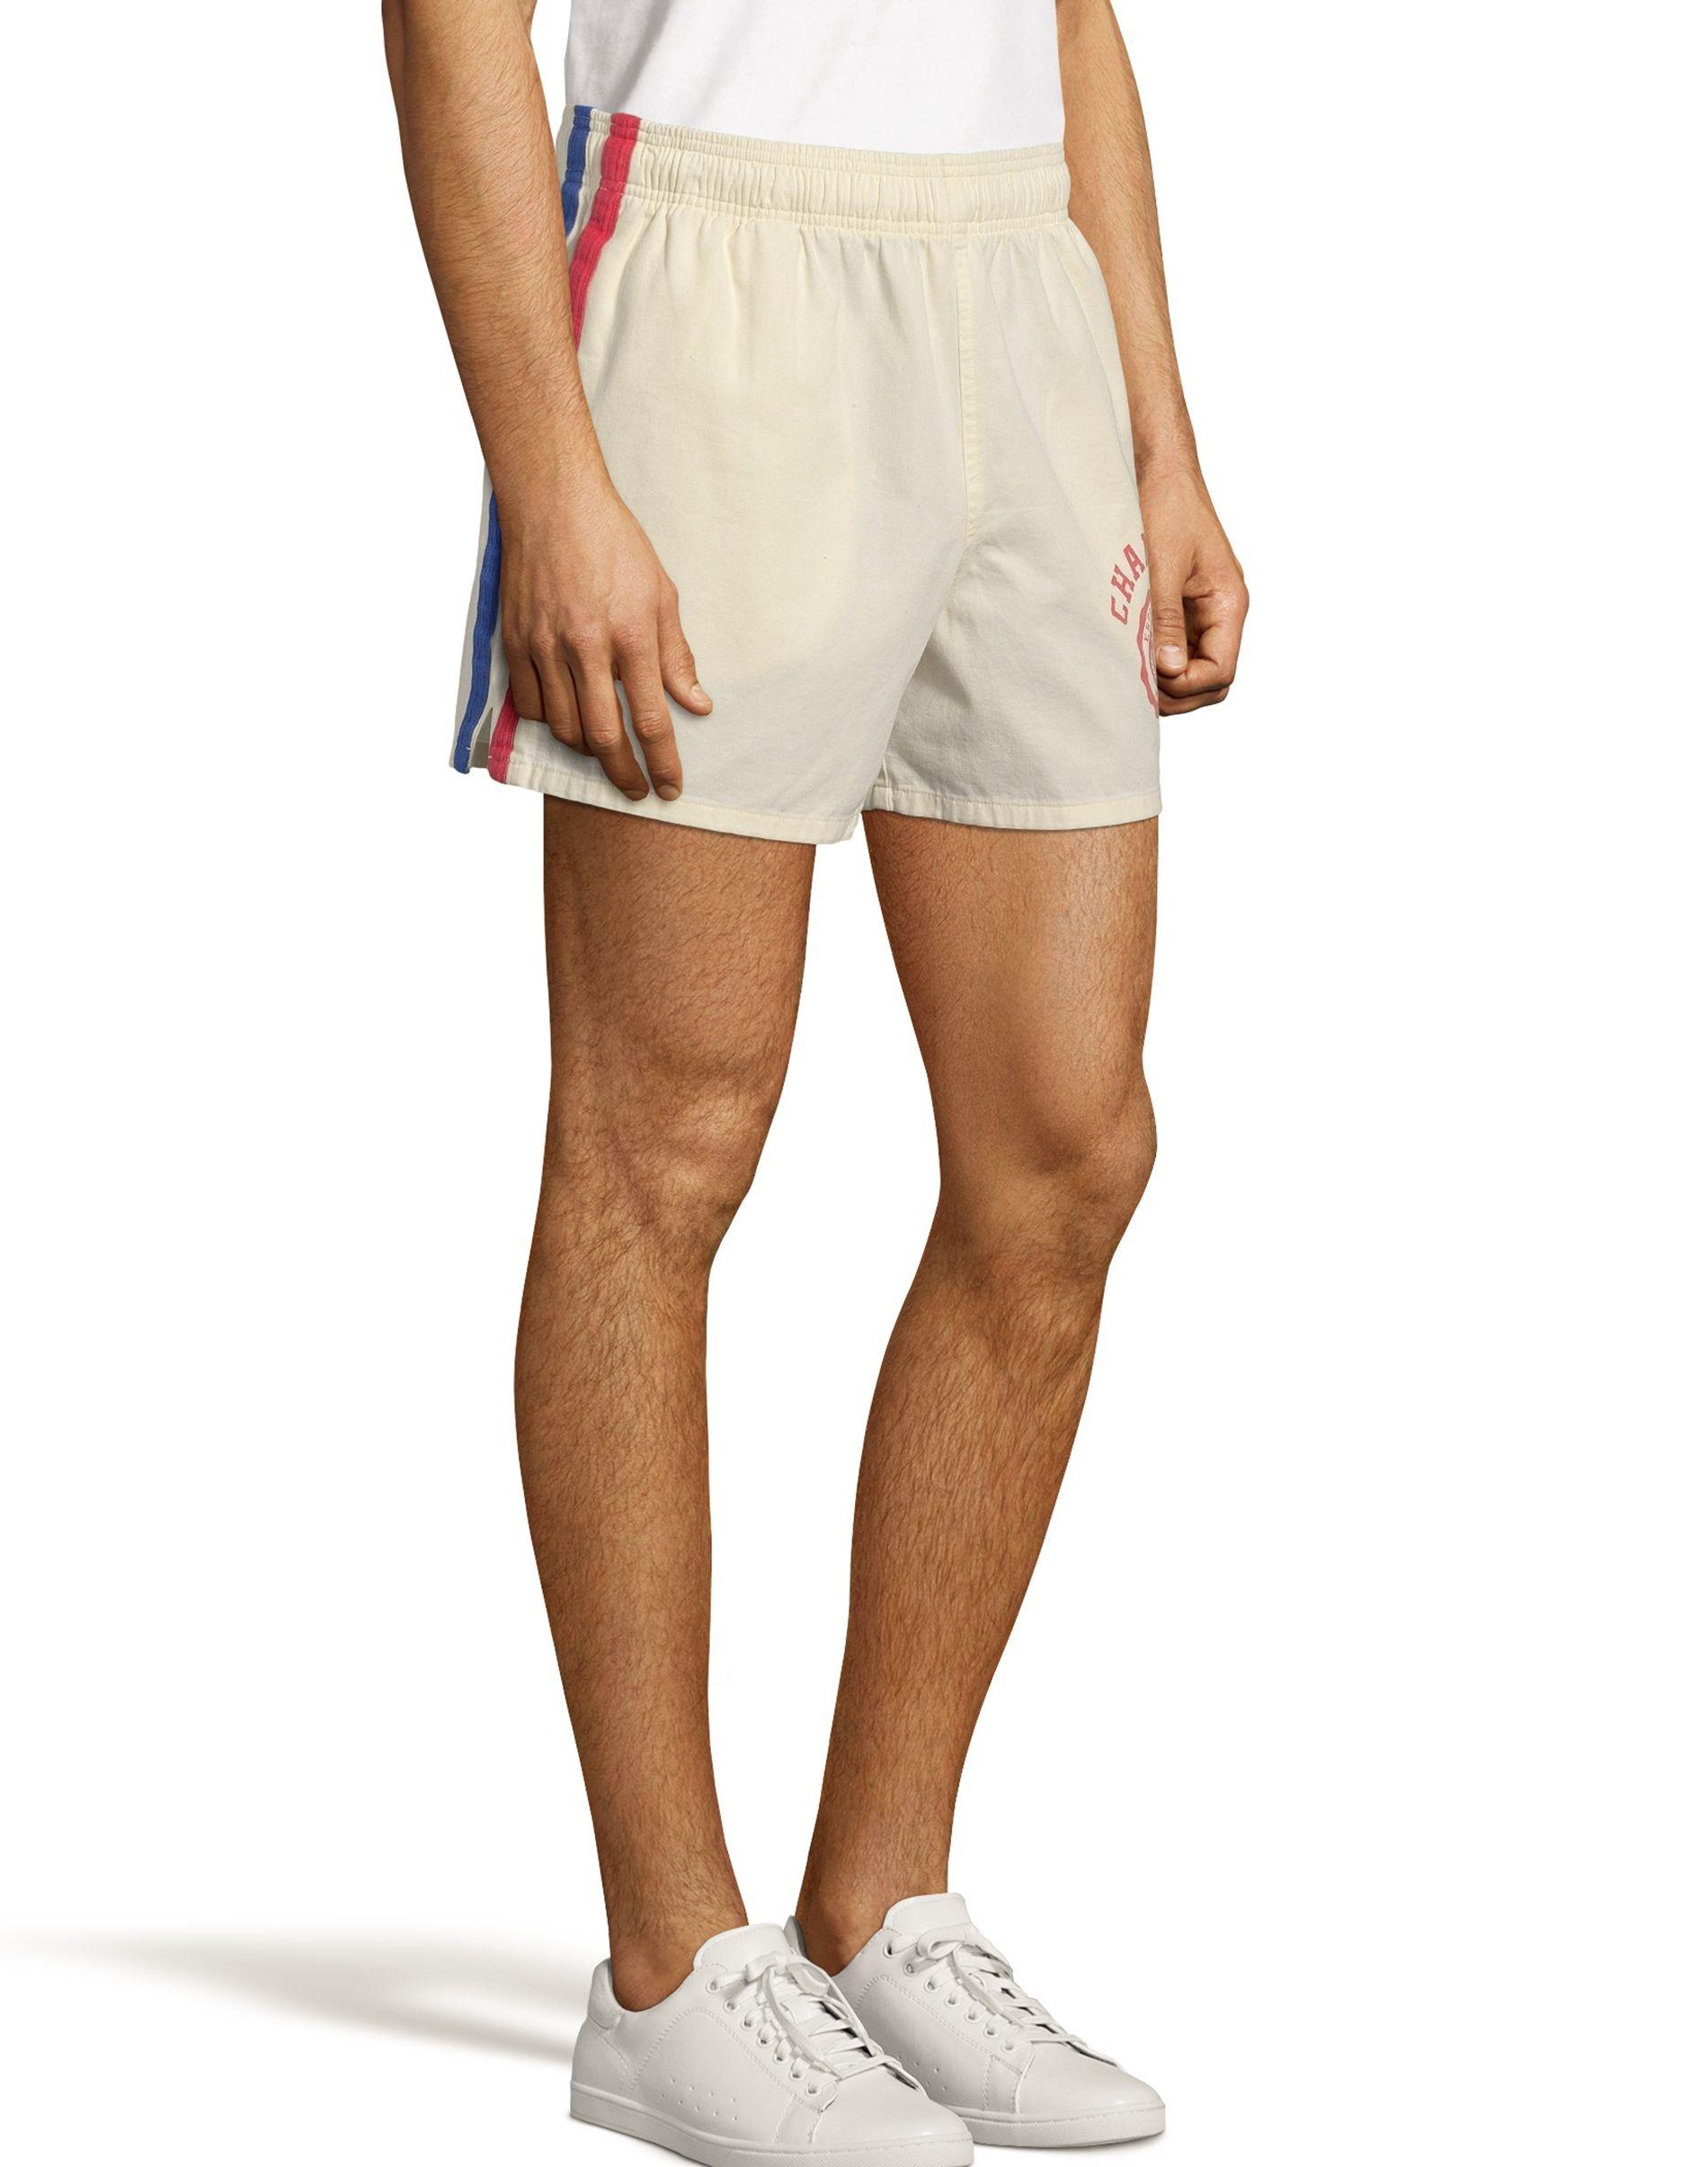 Rally Shorts in Chalk White 